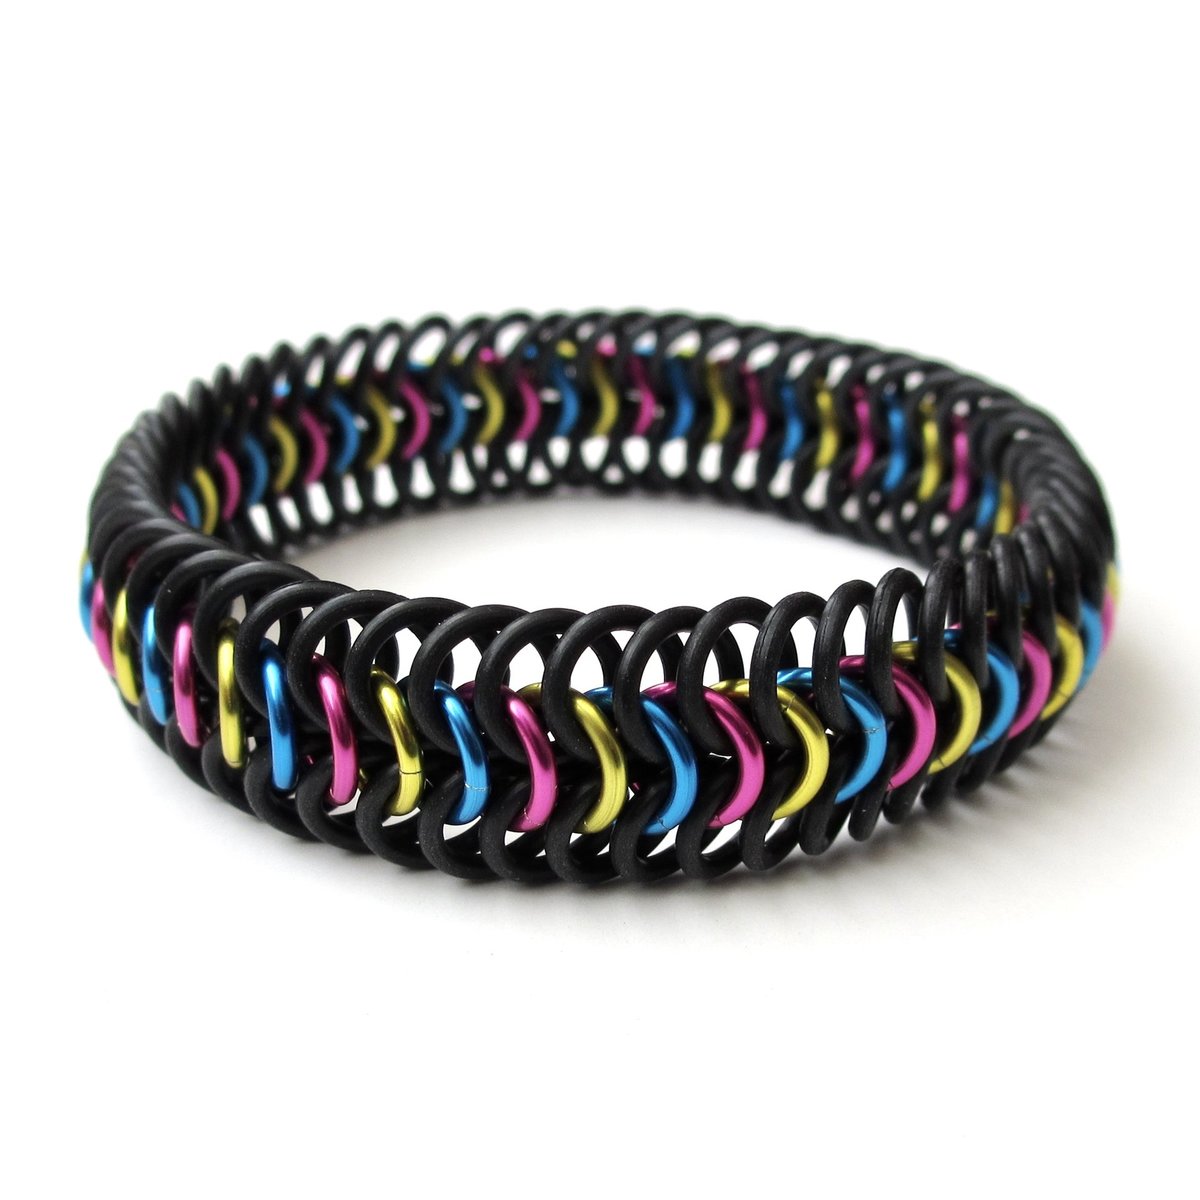 Pansexual pride bracelet, pan pride jewelry, chainmail stretchy bracelet in pink, yellow and blue